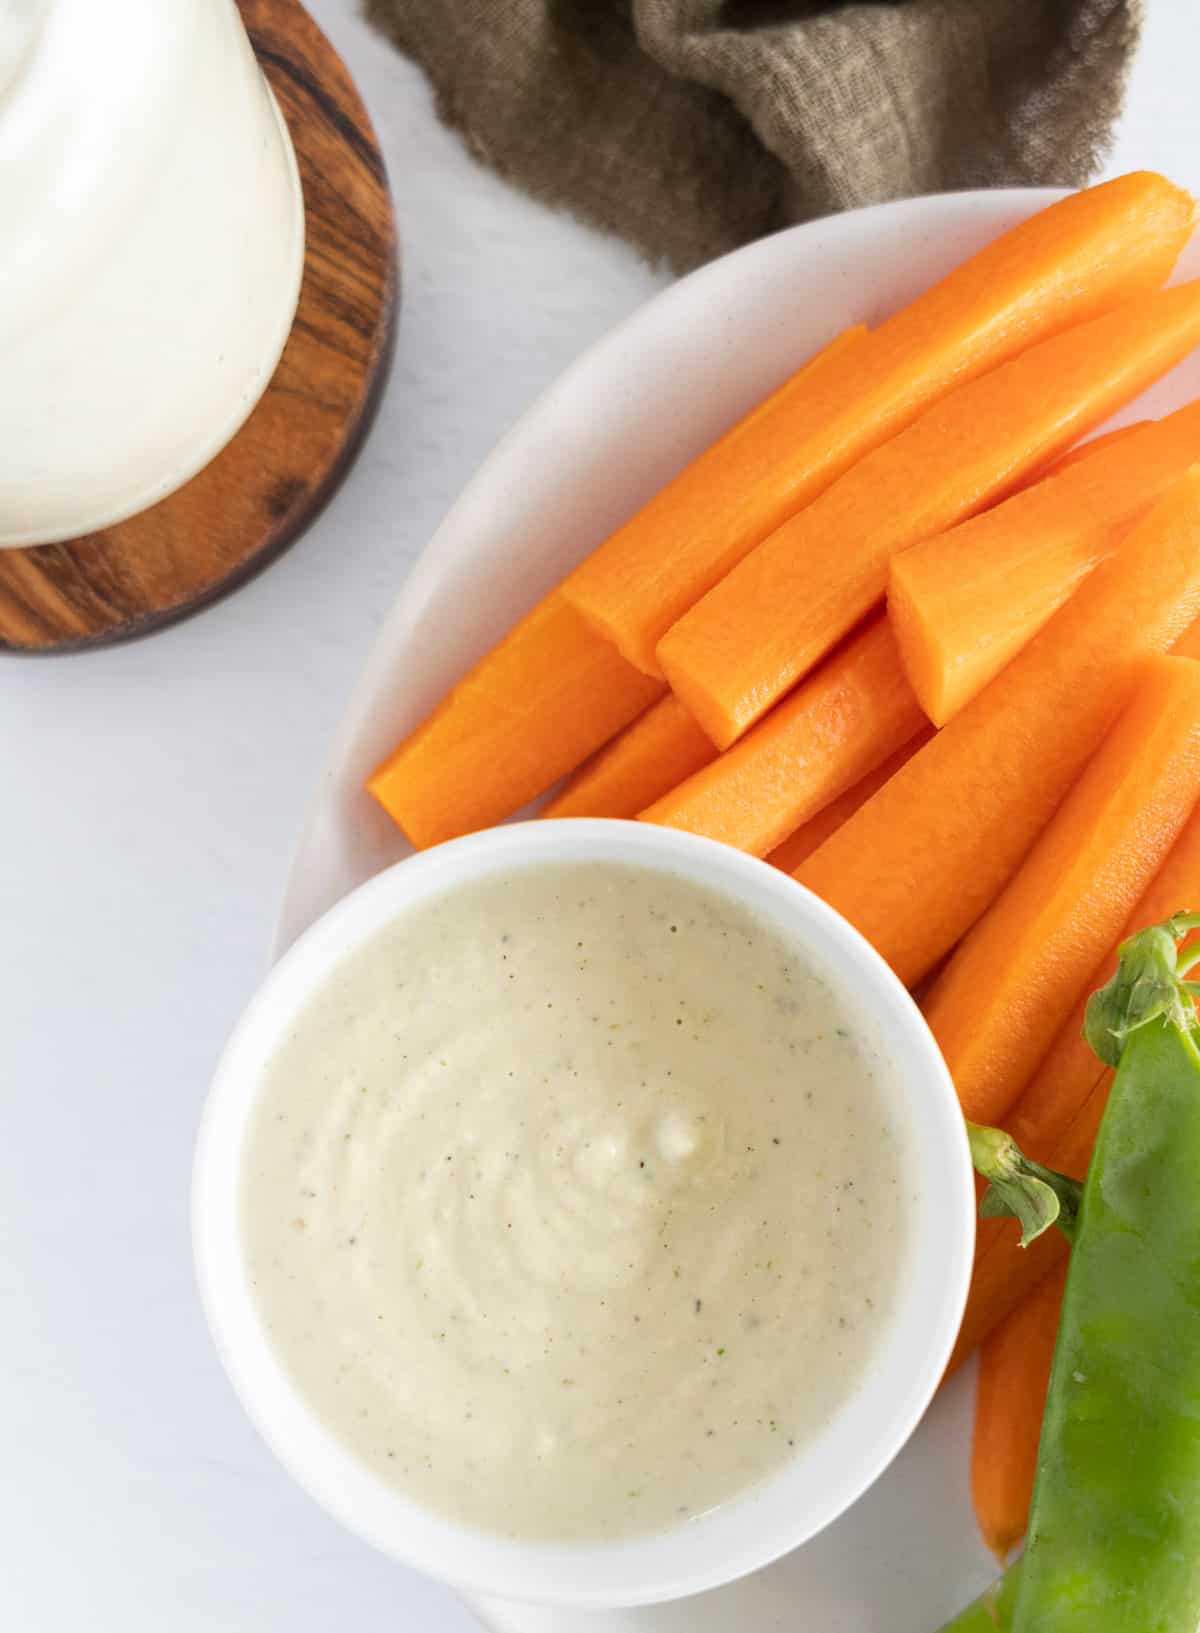 carrot stick on the side of a bowl of white sauce